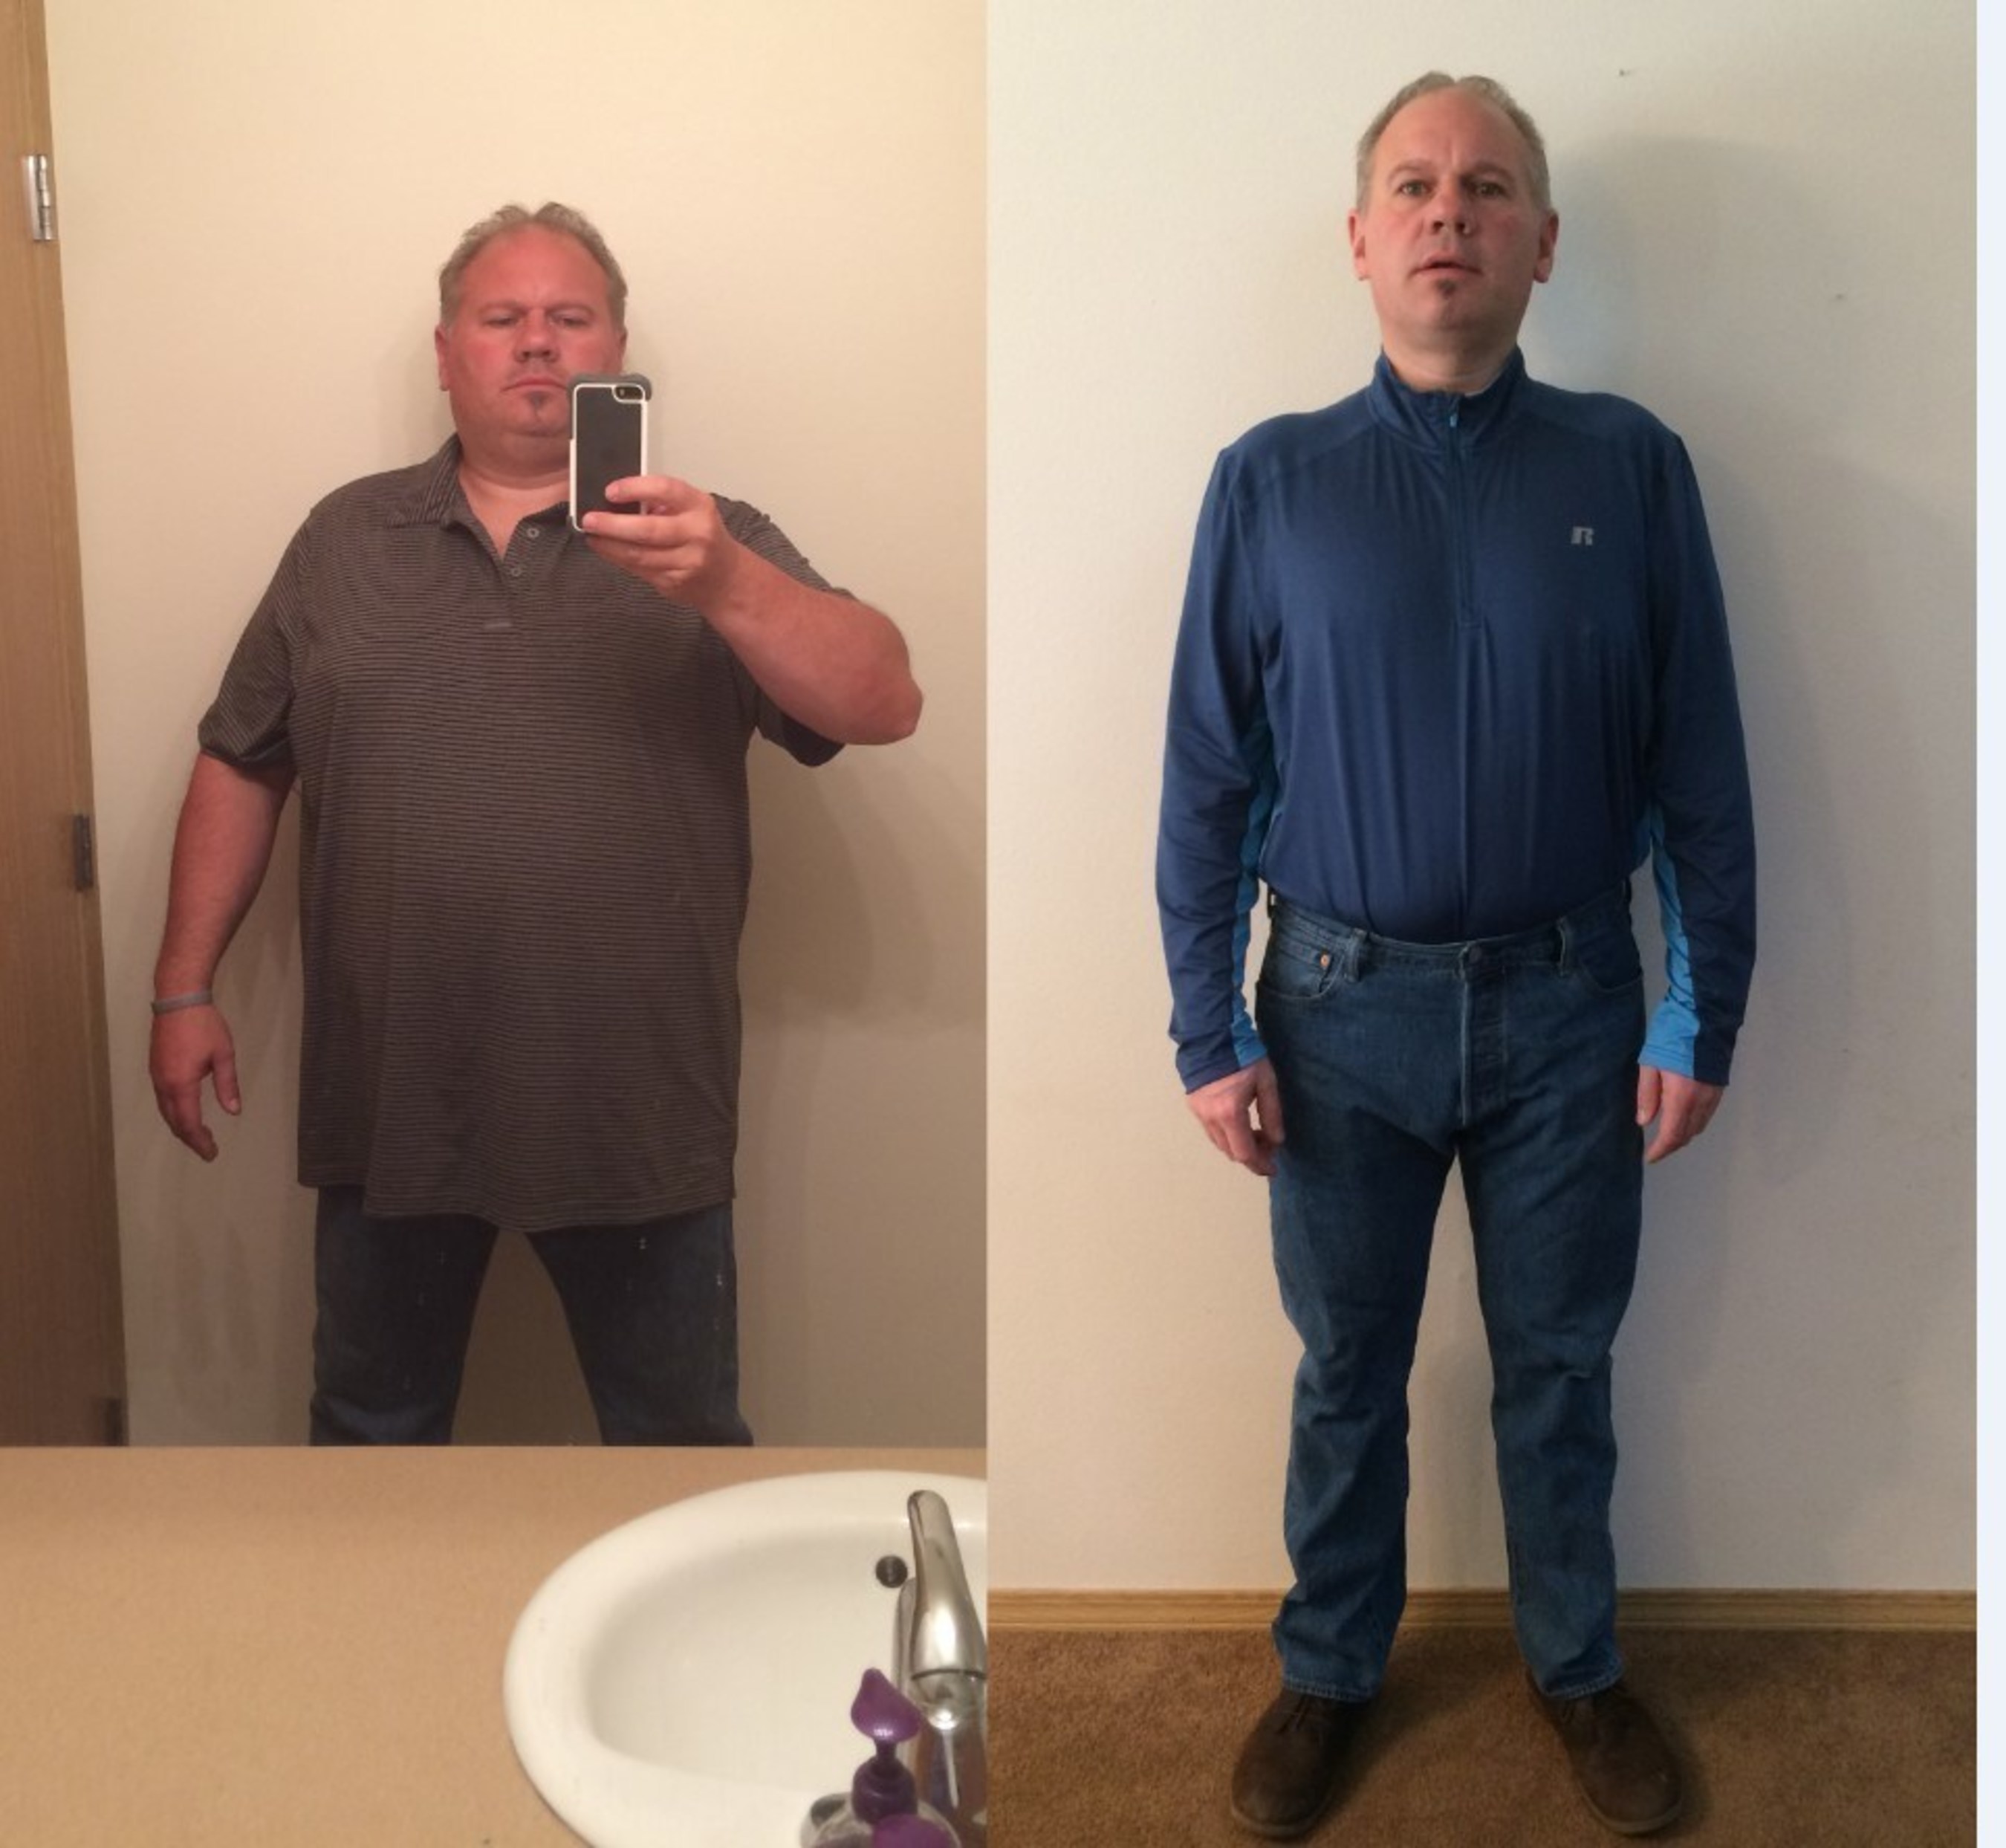 Charlie has lost 81 pounds in 12 months and credits ReShape for his renewed health and quality of life.